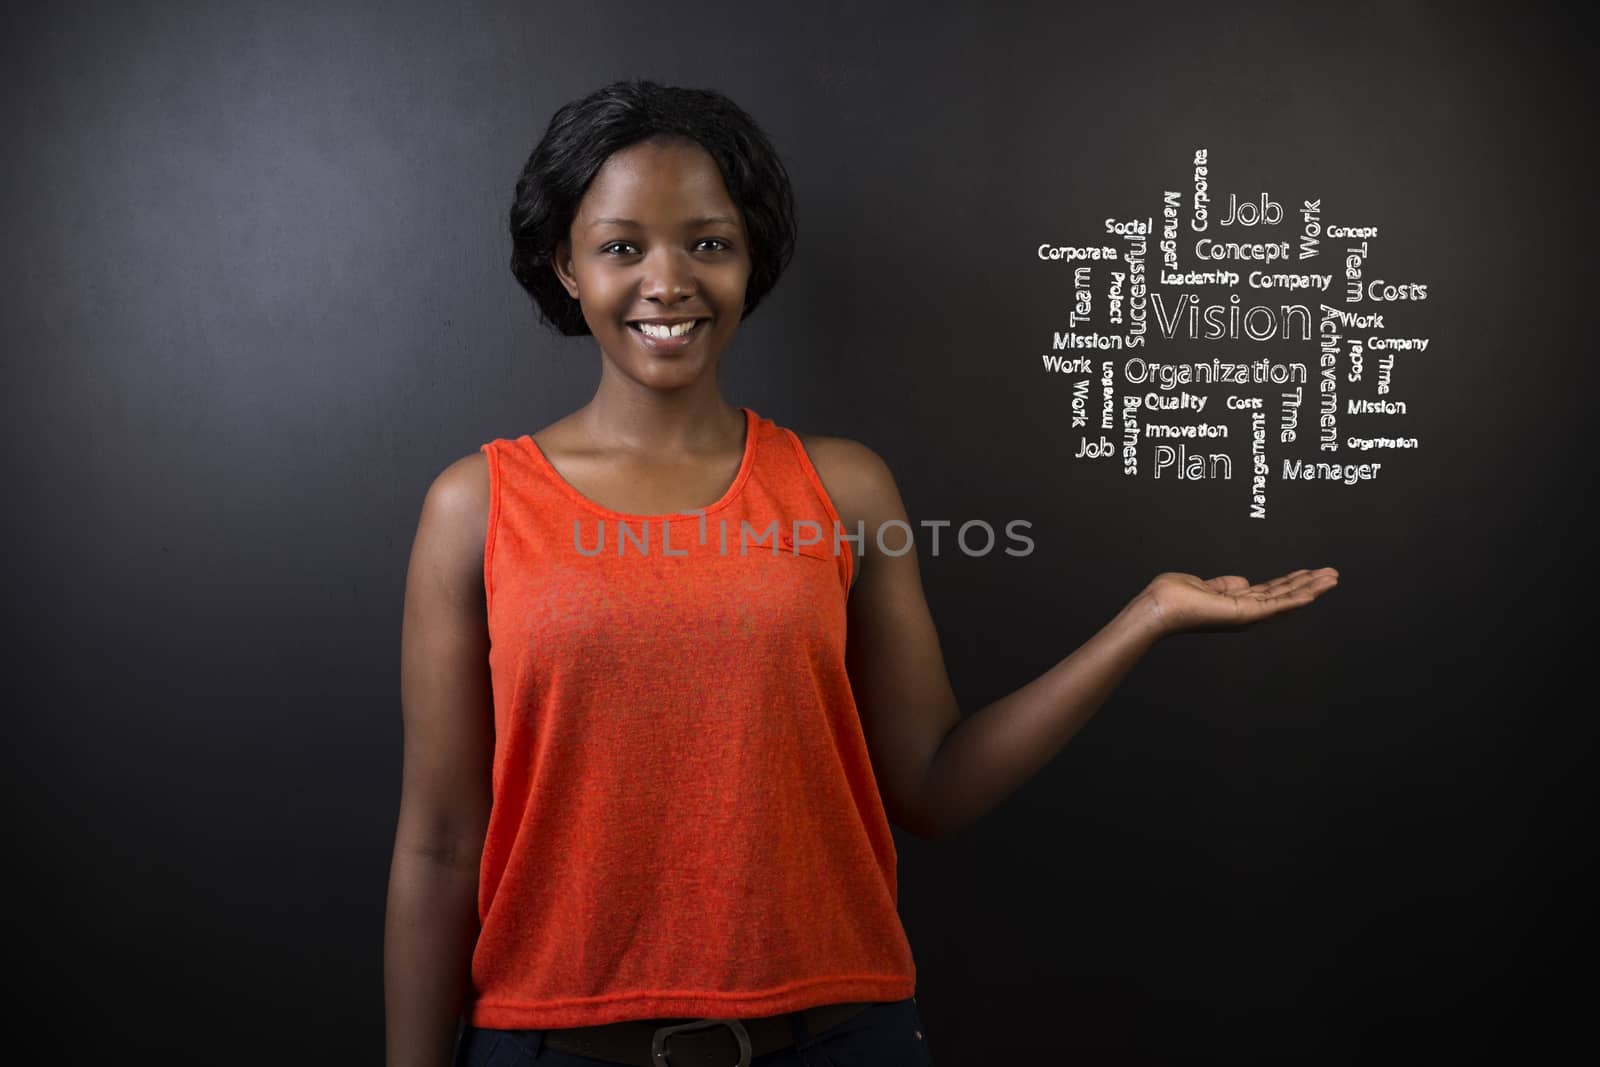 South African or African American woman teacher or student with hand out standing against a blackboard background with a chalk vision diagram